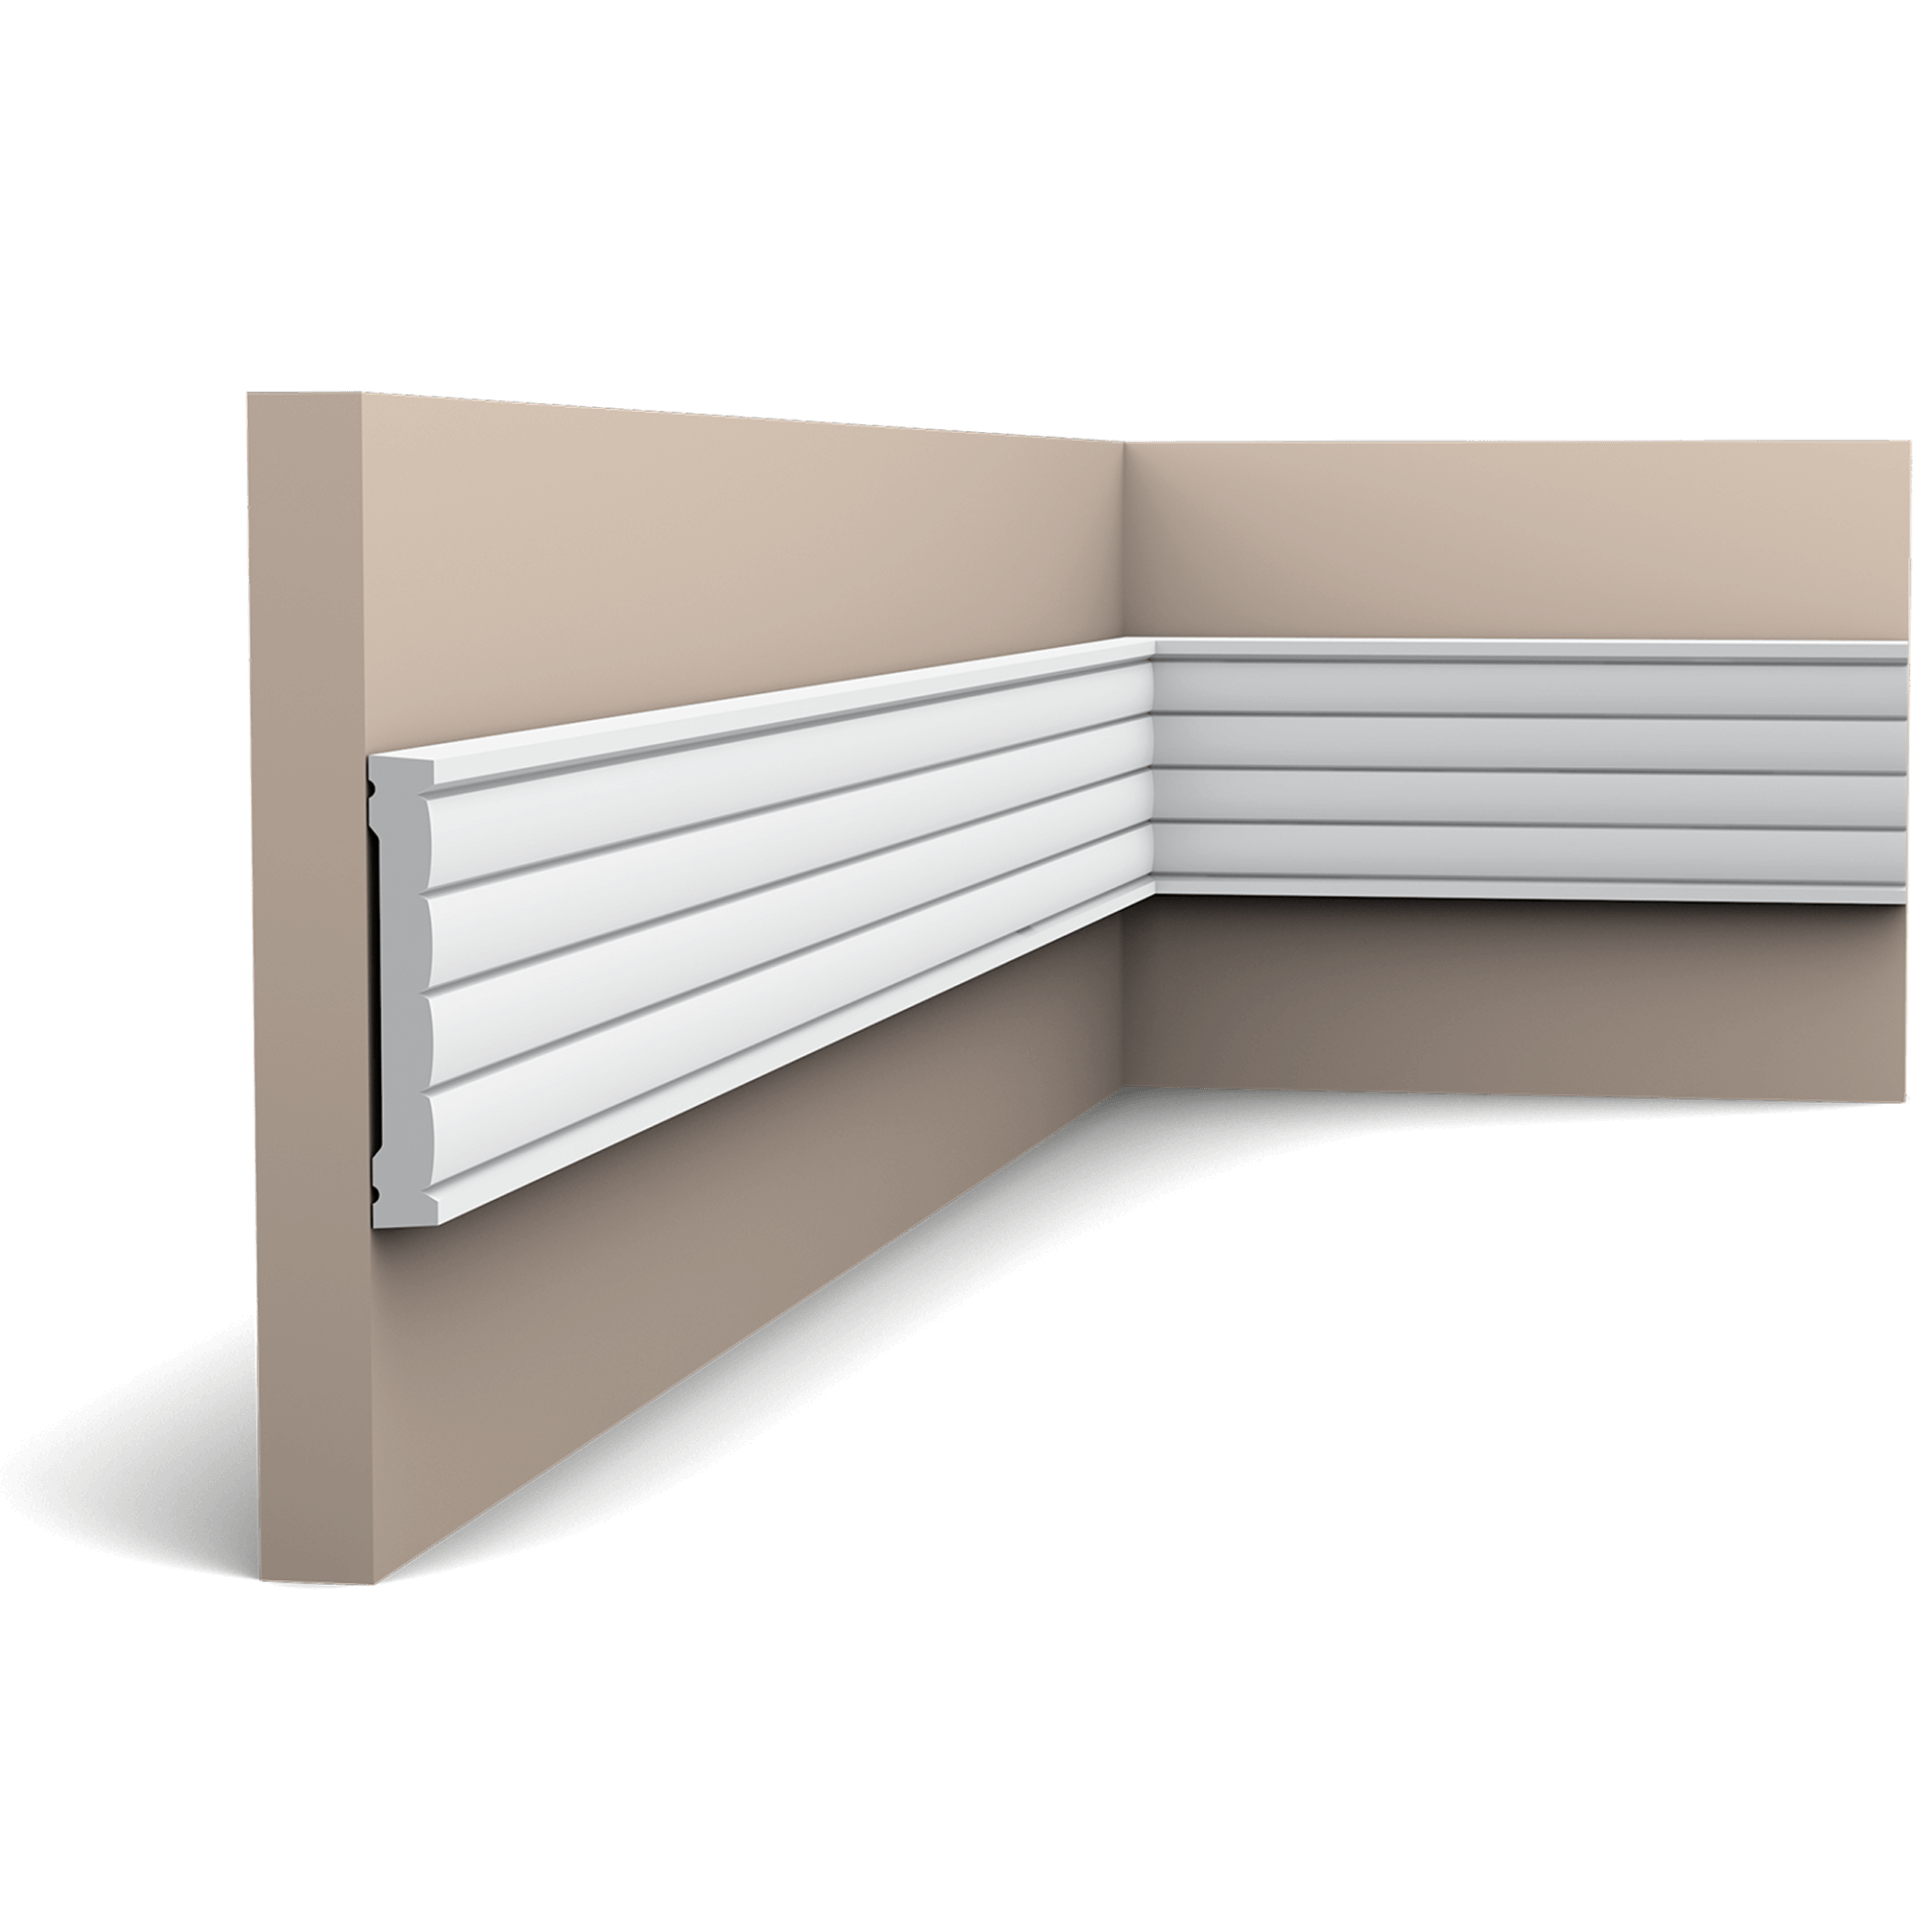 p5020 panel moulding 3d8c Simple, flat panel moulding with a linear design. Combine it with P5020B for a stylish wall frame.